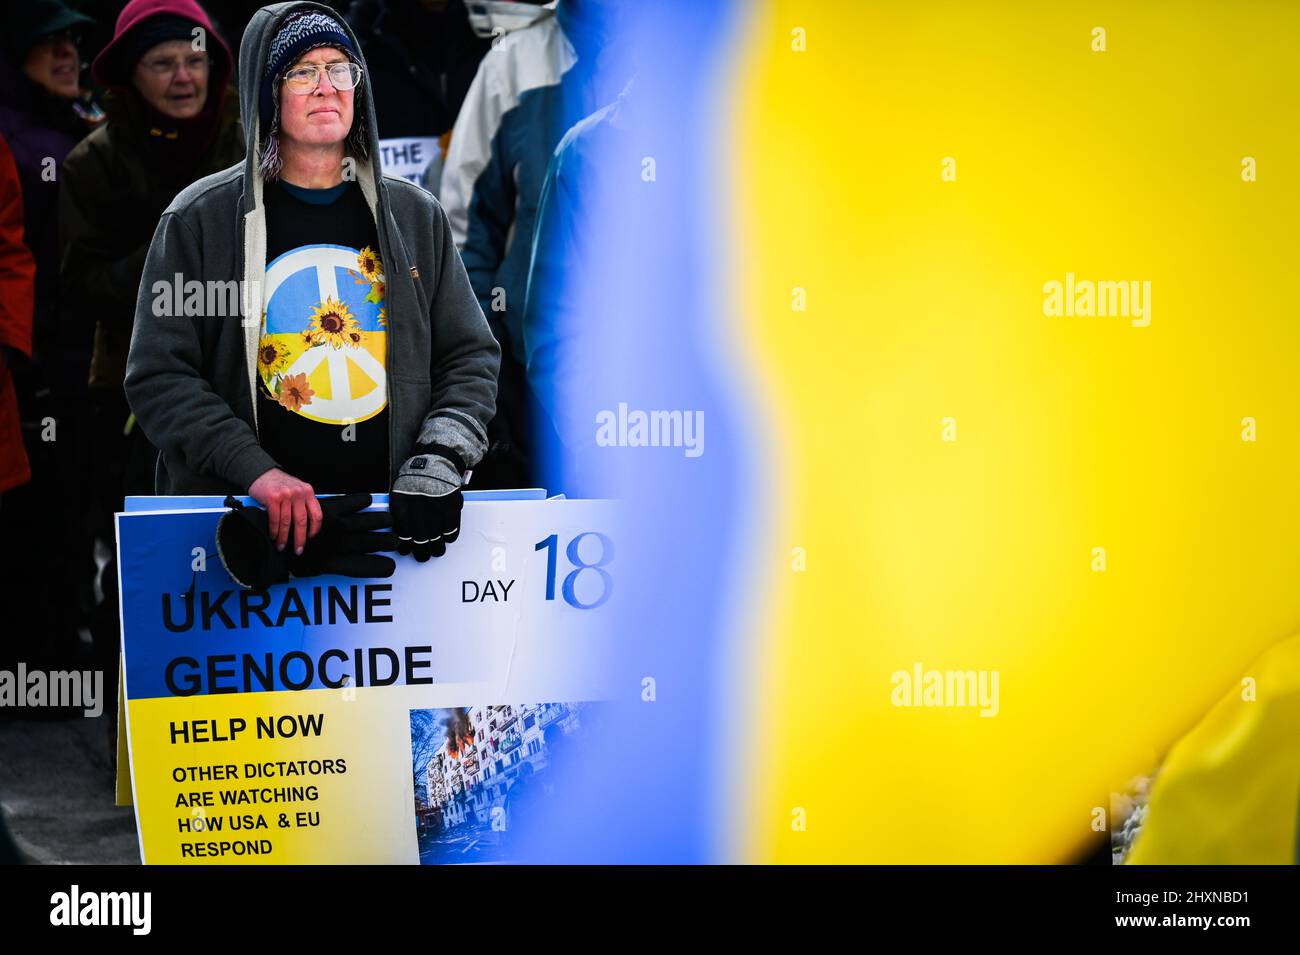 A pro-Ukraine demonstrator stands at a Vermont Stands with Ukraine rally at the Vermont State House, Vermont, New England, USA, March 13, 2022. Stock Photo